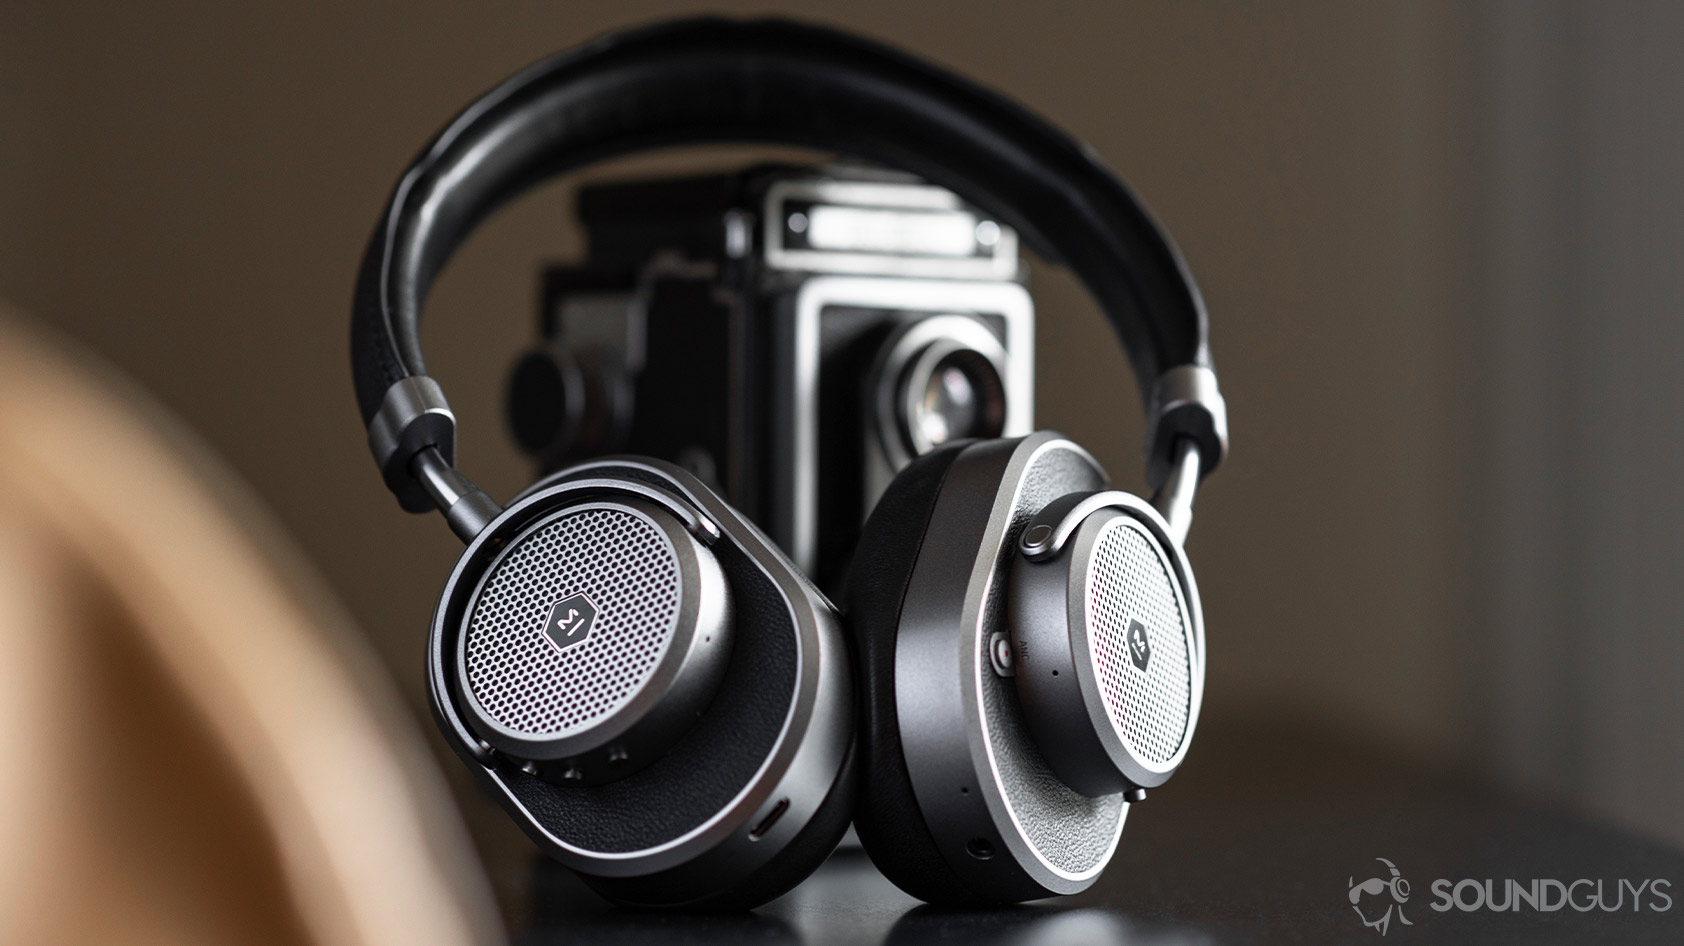 Master & Dynamic MW65 review: An extravagant expense - SoundGuys